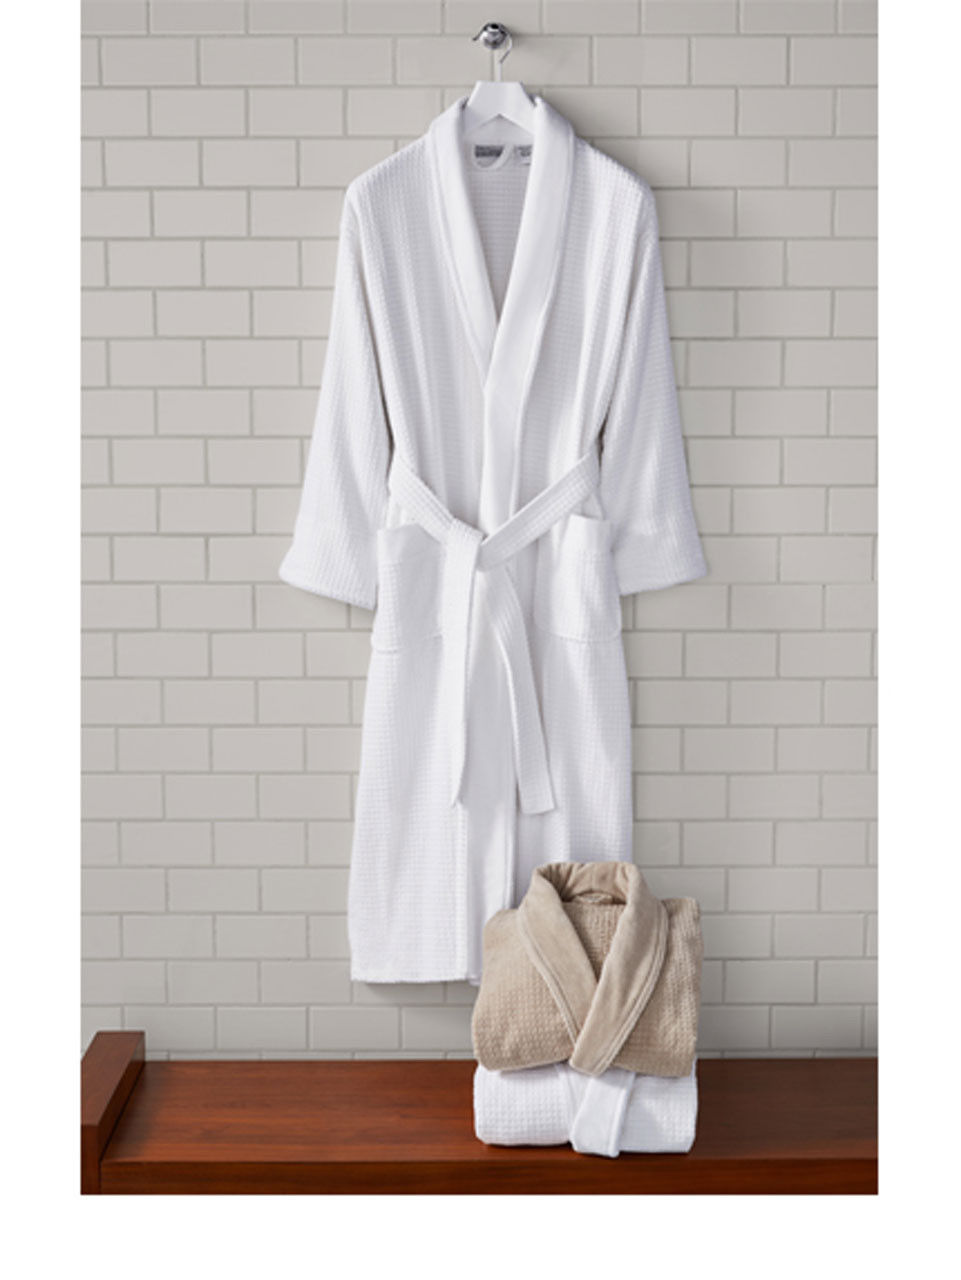 Is the 1concier robe as comfortable as the Platinum Shawl Collar Robe?